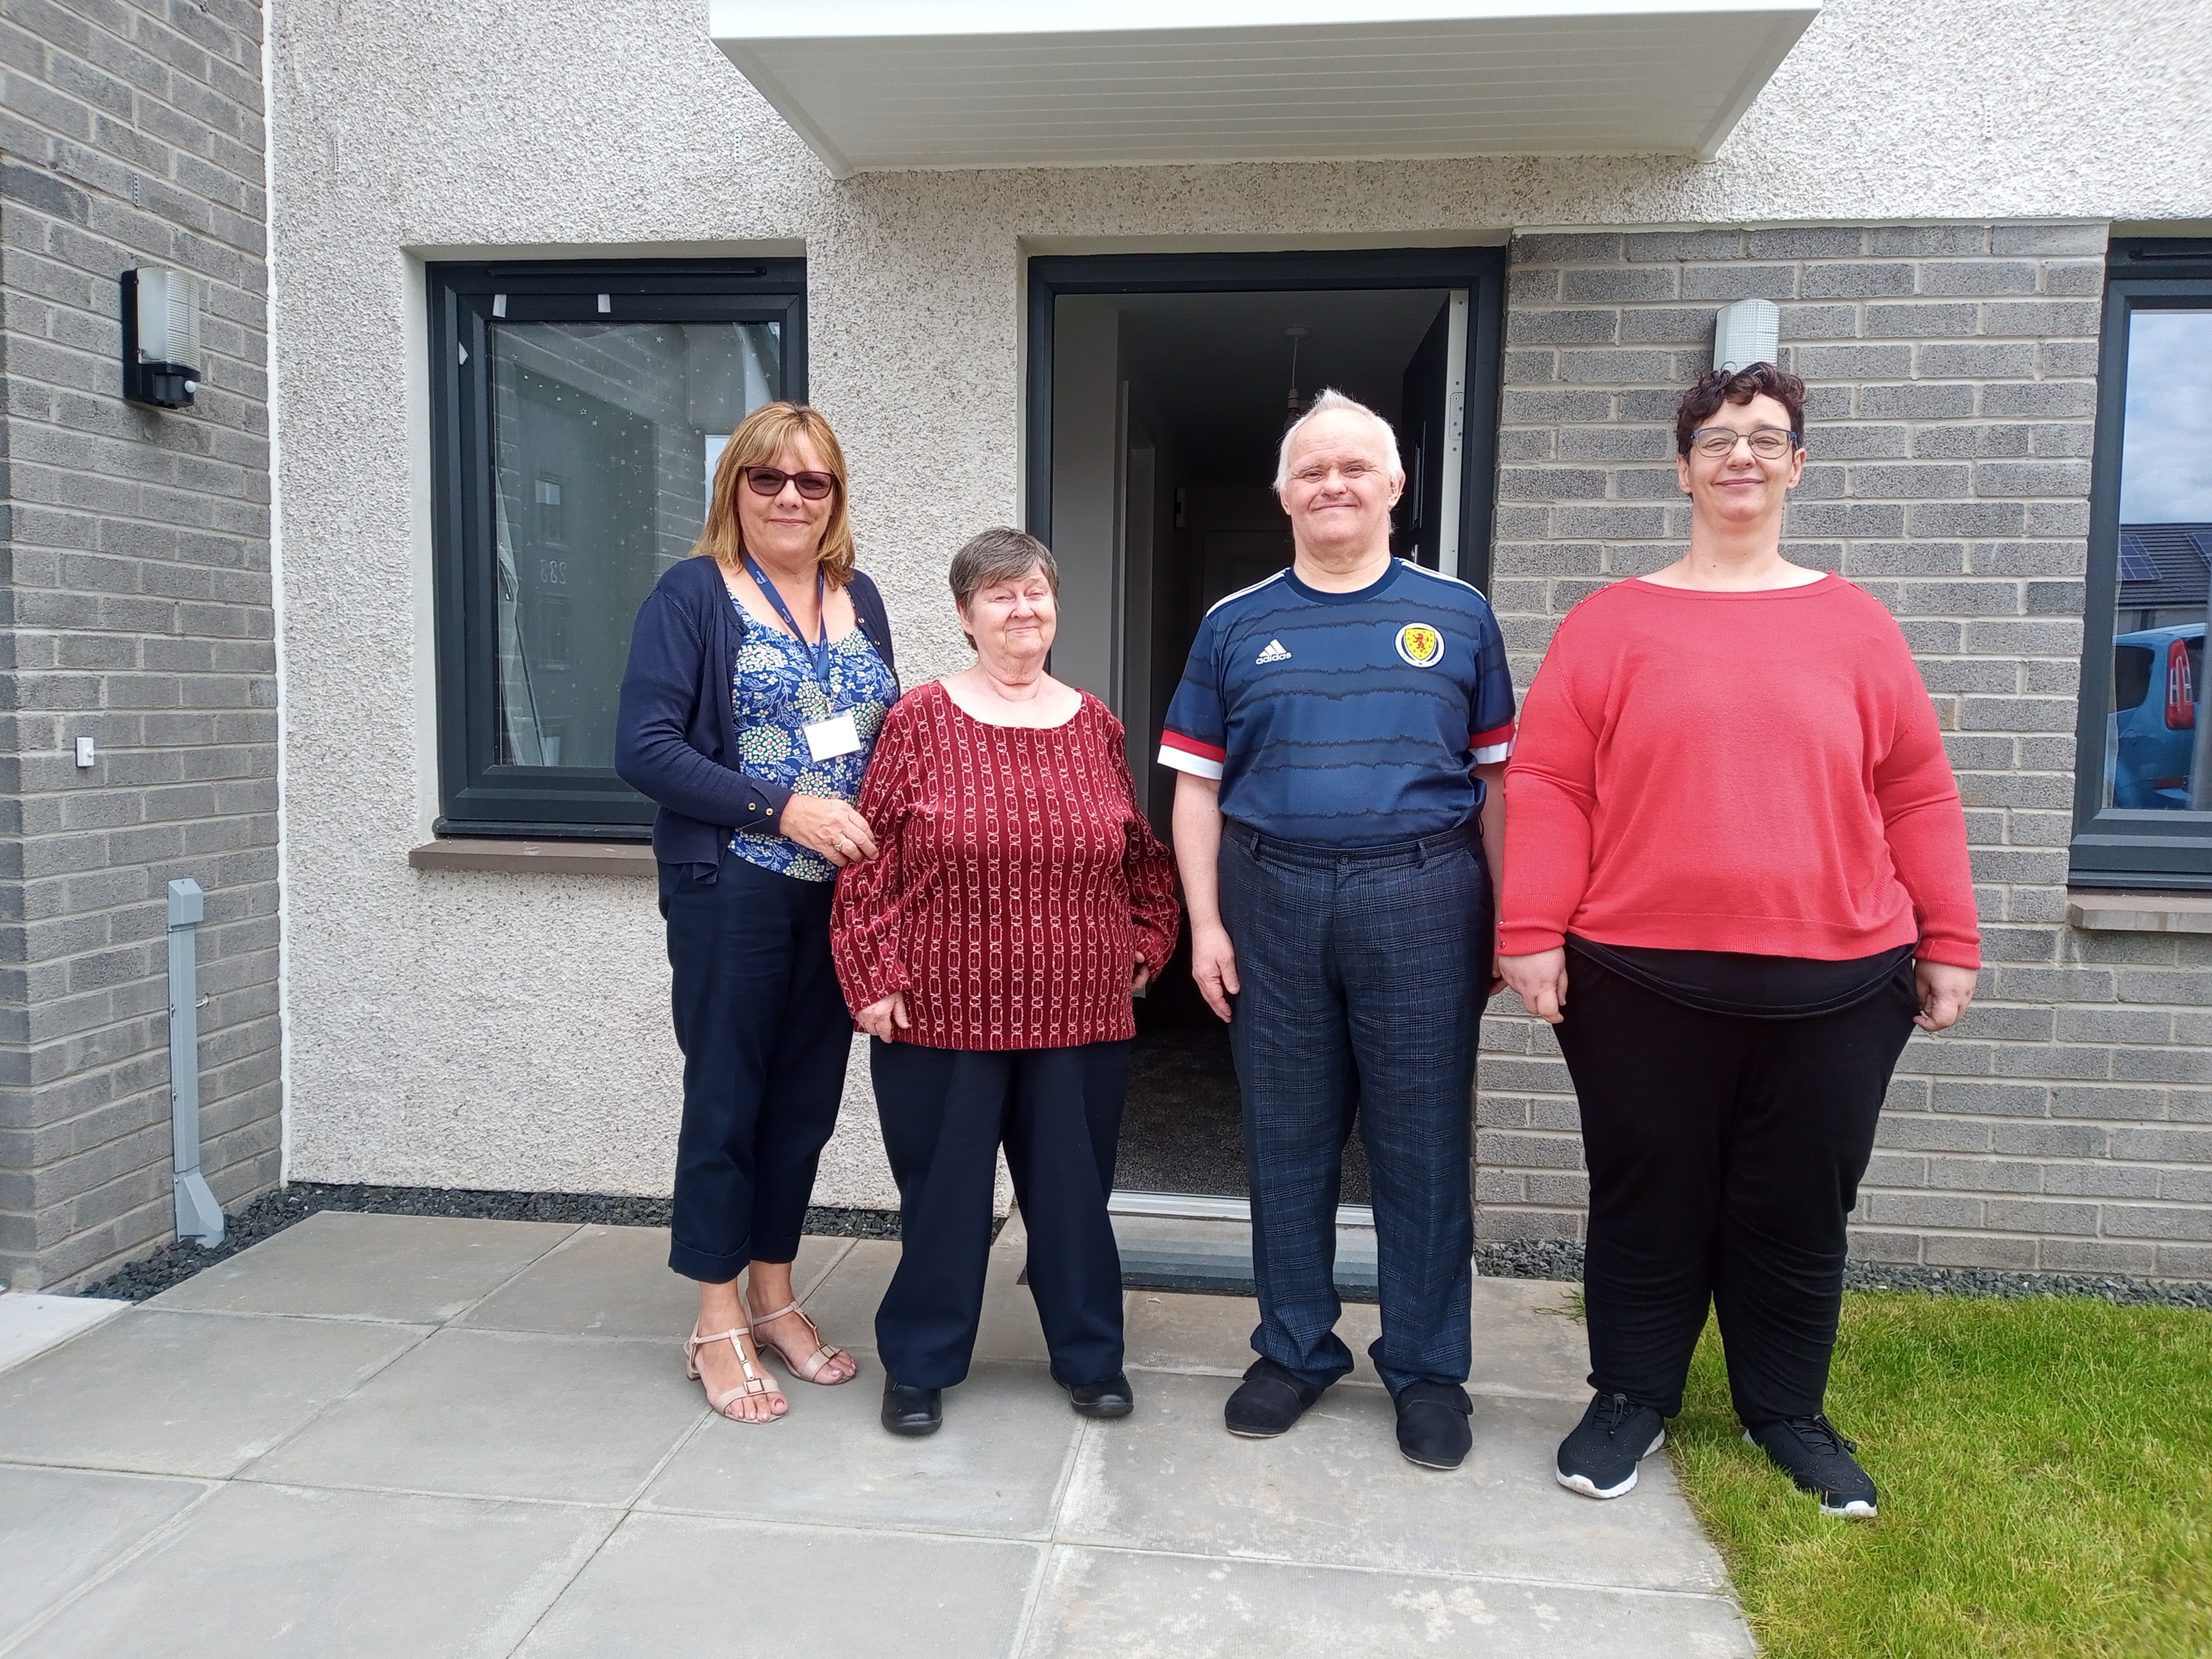 Alternative accommodation found for vulnerable Hillcrest residents housed in defective Crieff building